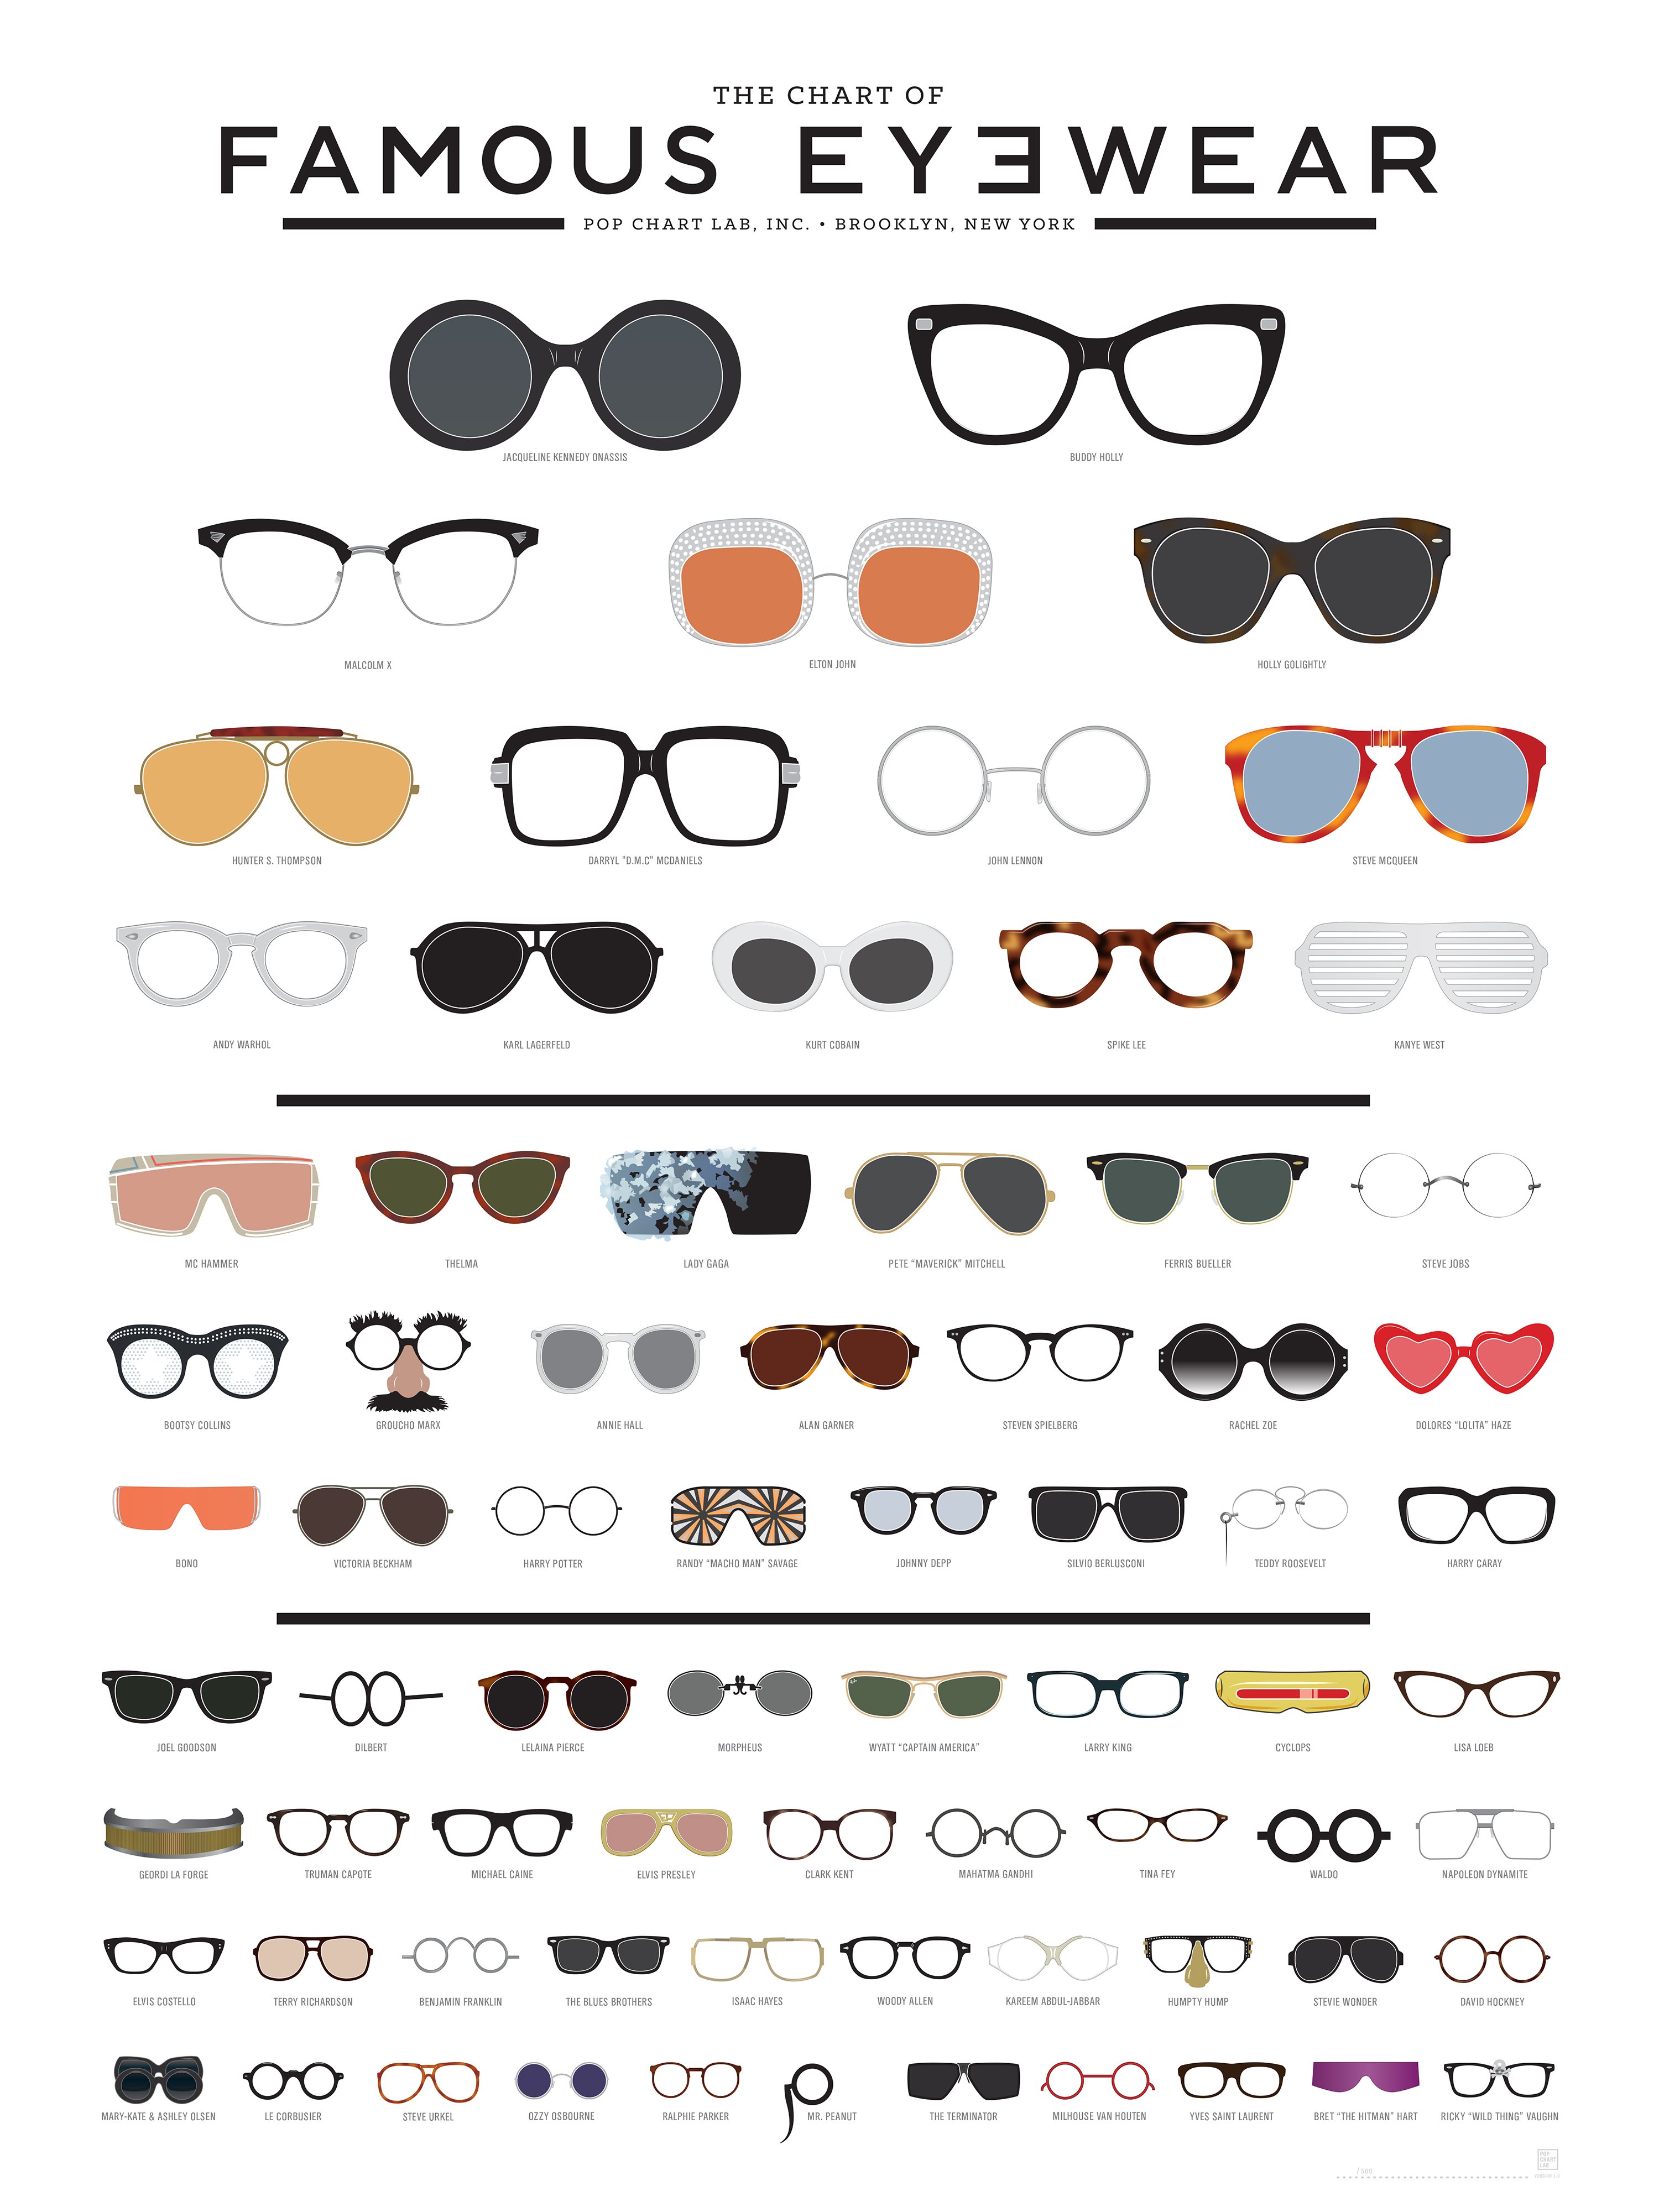 Pop Chart Lab | Design + Data = Delight | The Chart of Famous Eyewear